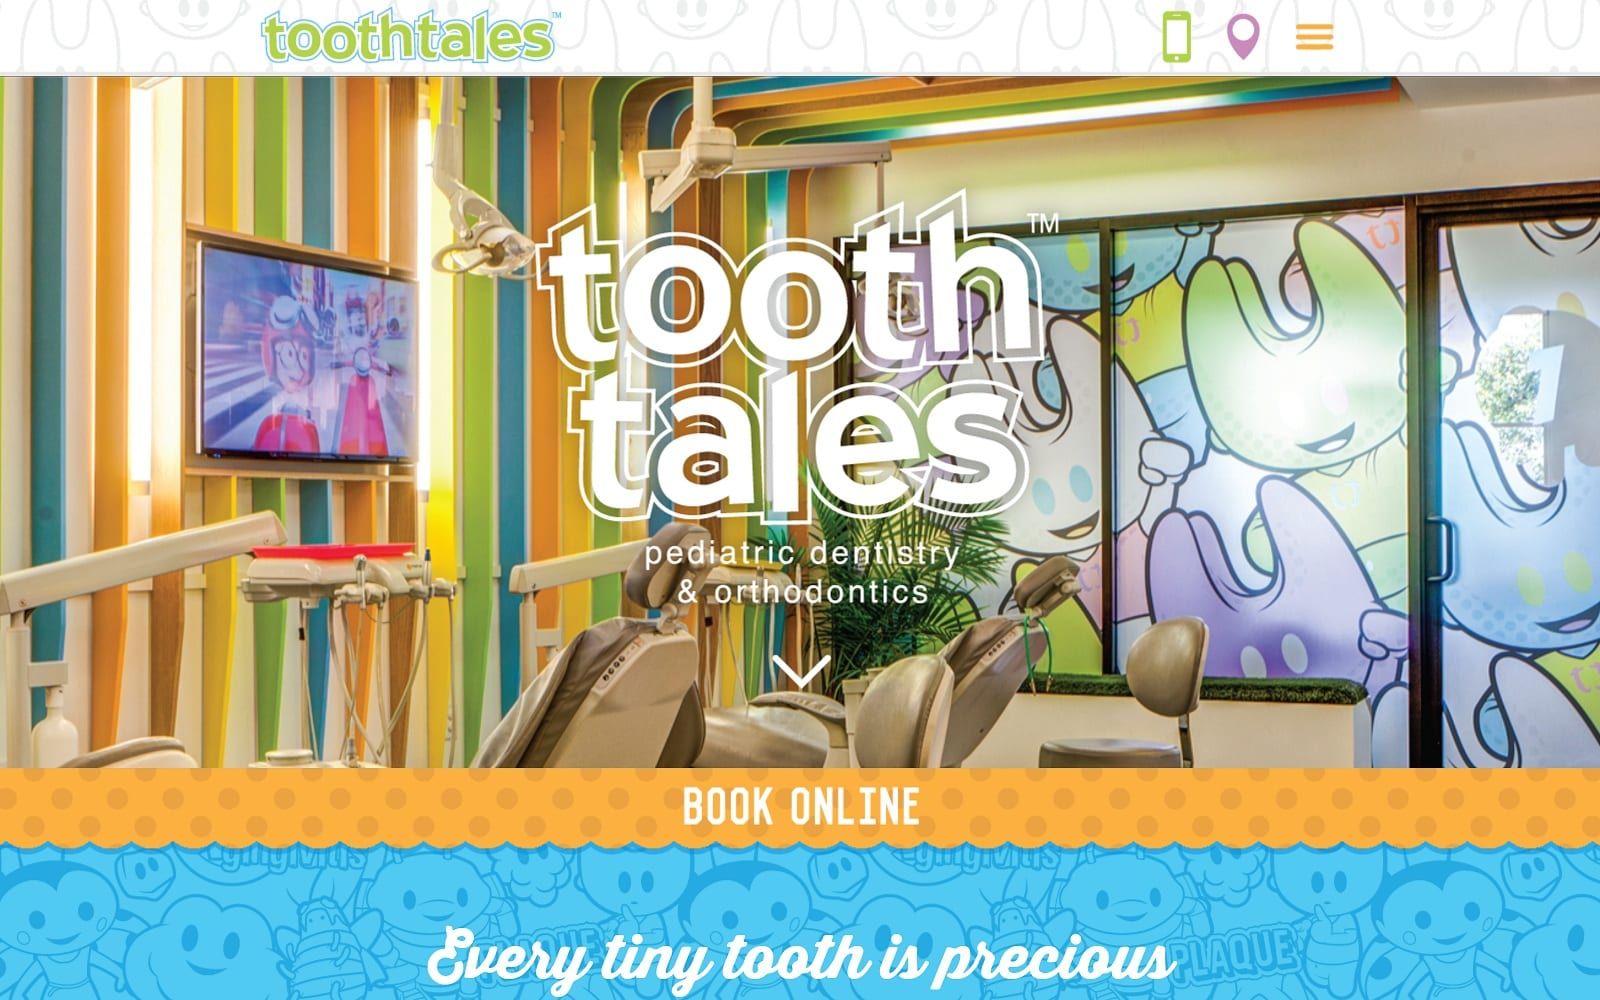 The screenshot of tooth tales pediatric dentistry & orthodontics mytoothtales. Com website